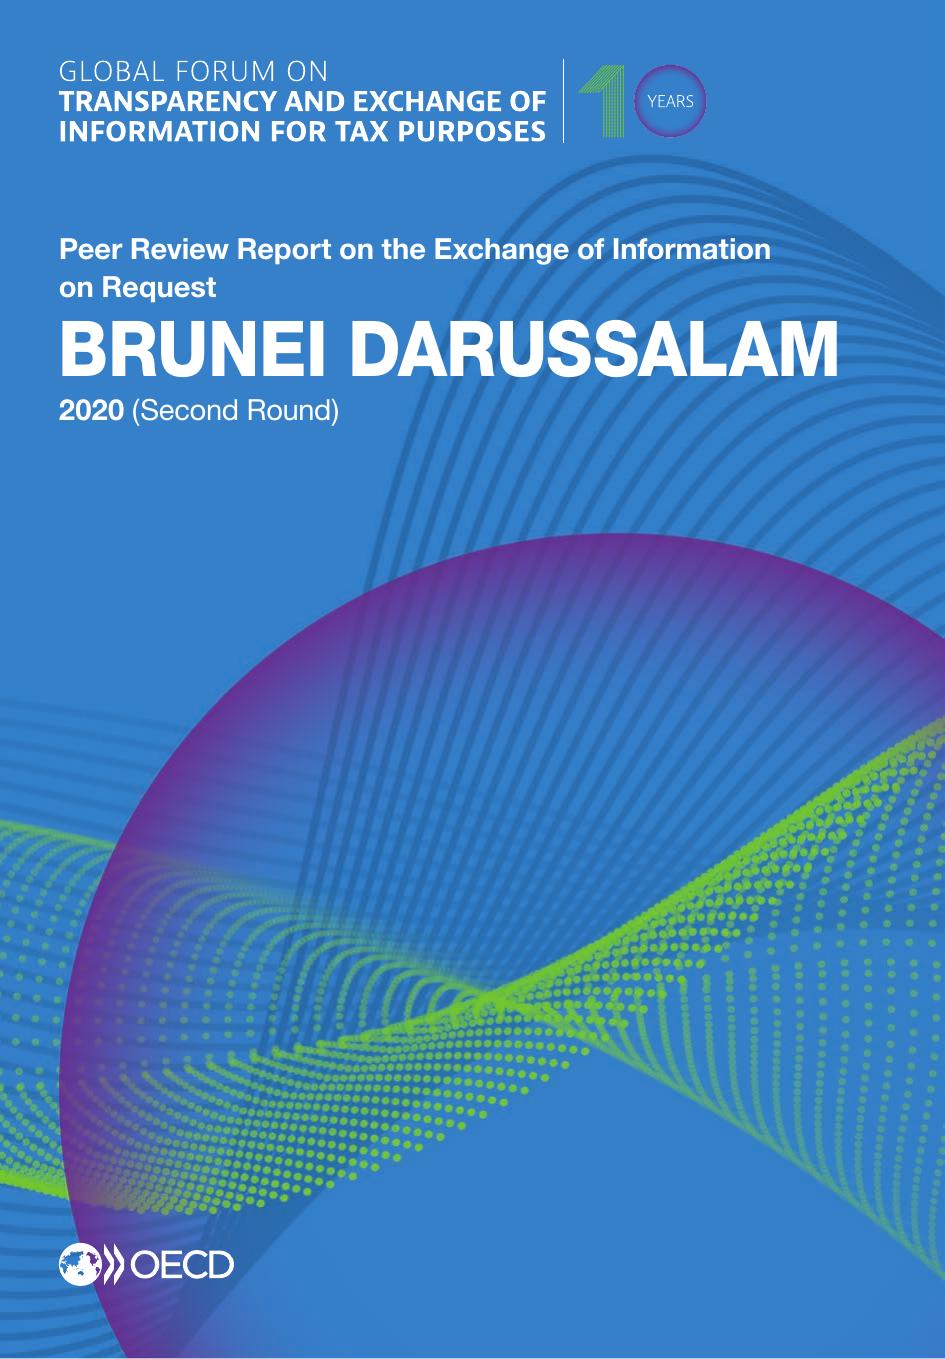 Global Forum on Transparency and Exchange of Information for Tax Purposes: Brunei Darussalam 2020 (Second Round) Peer Review Report on the Exchange of Information on Request by OECD